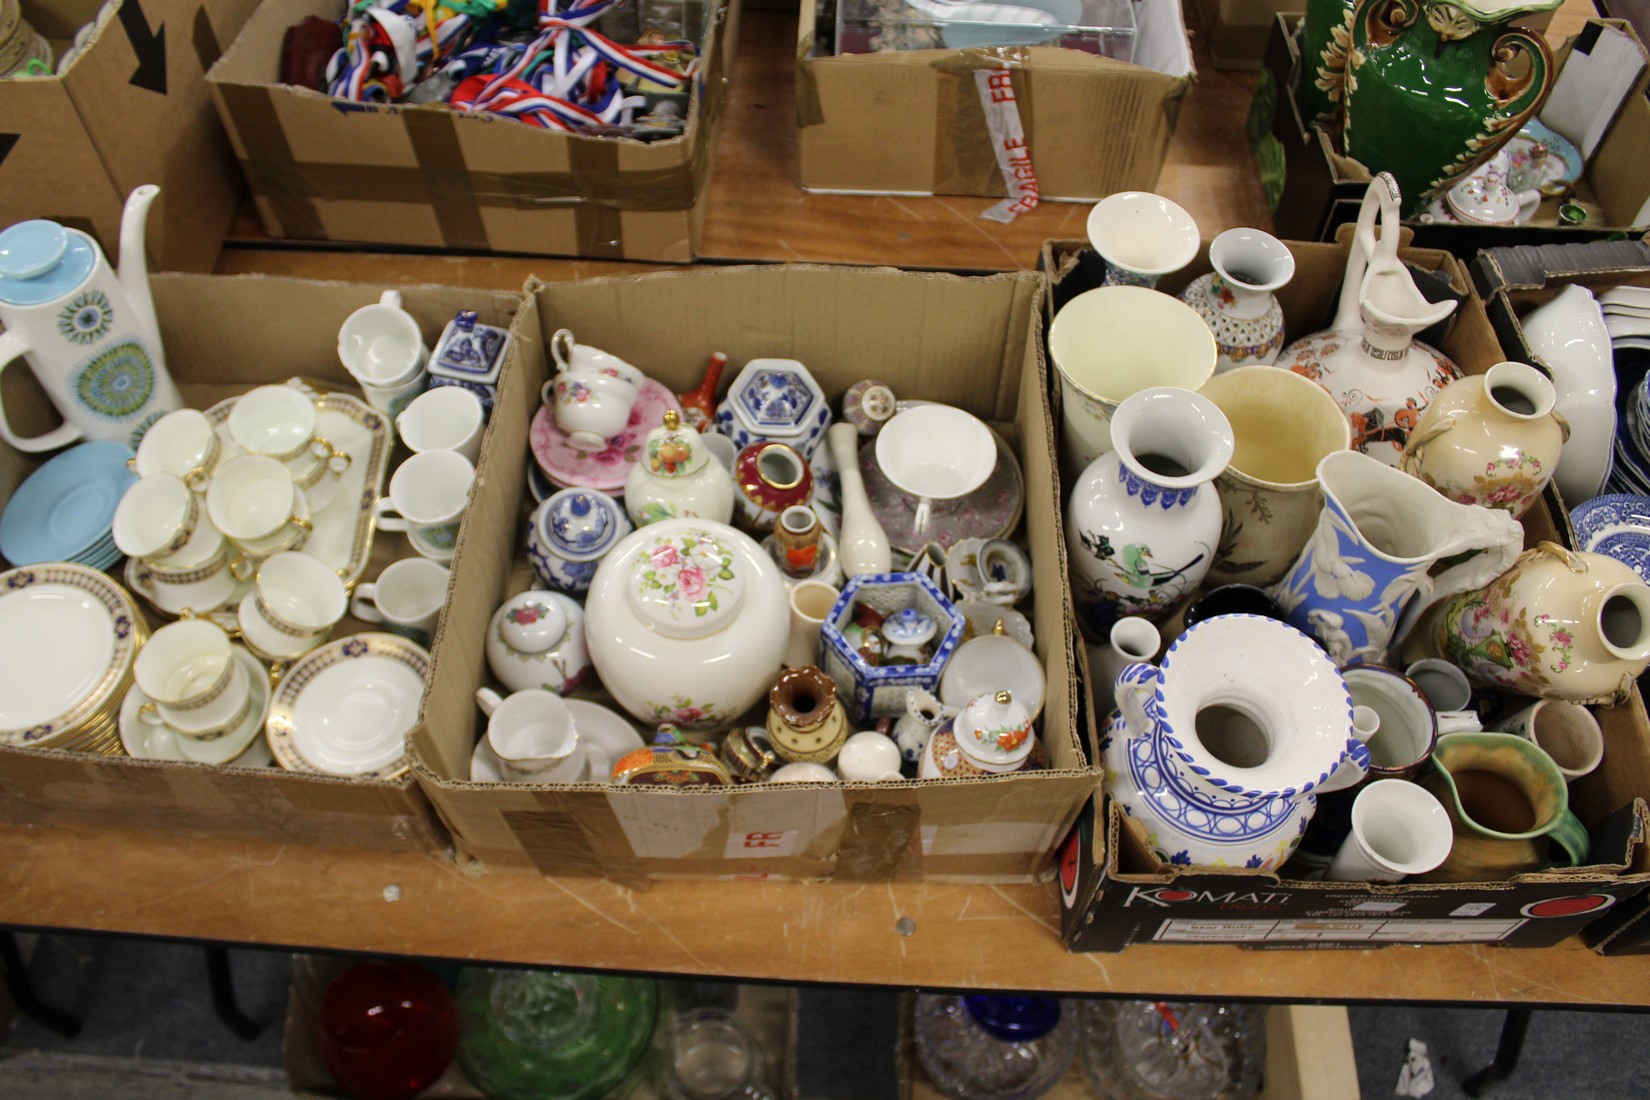 A quantity of household and decorative china.